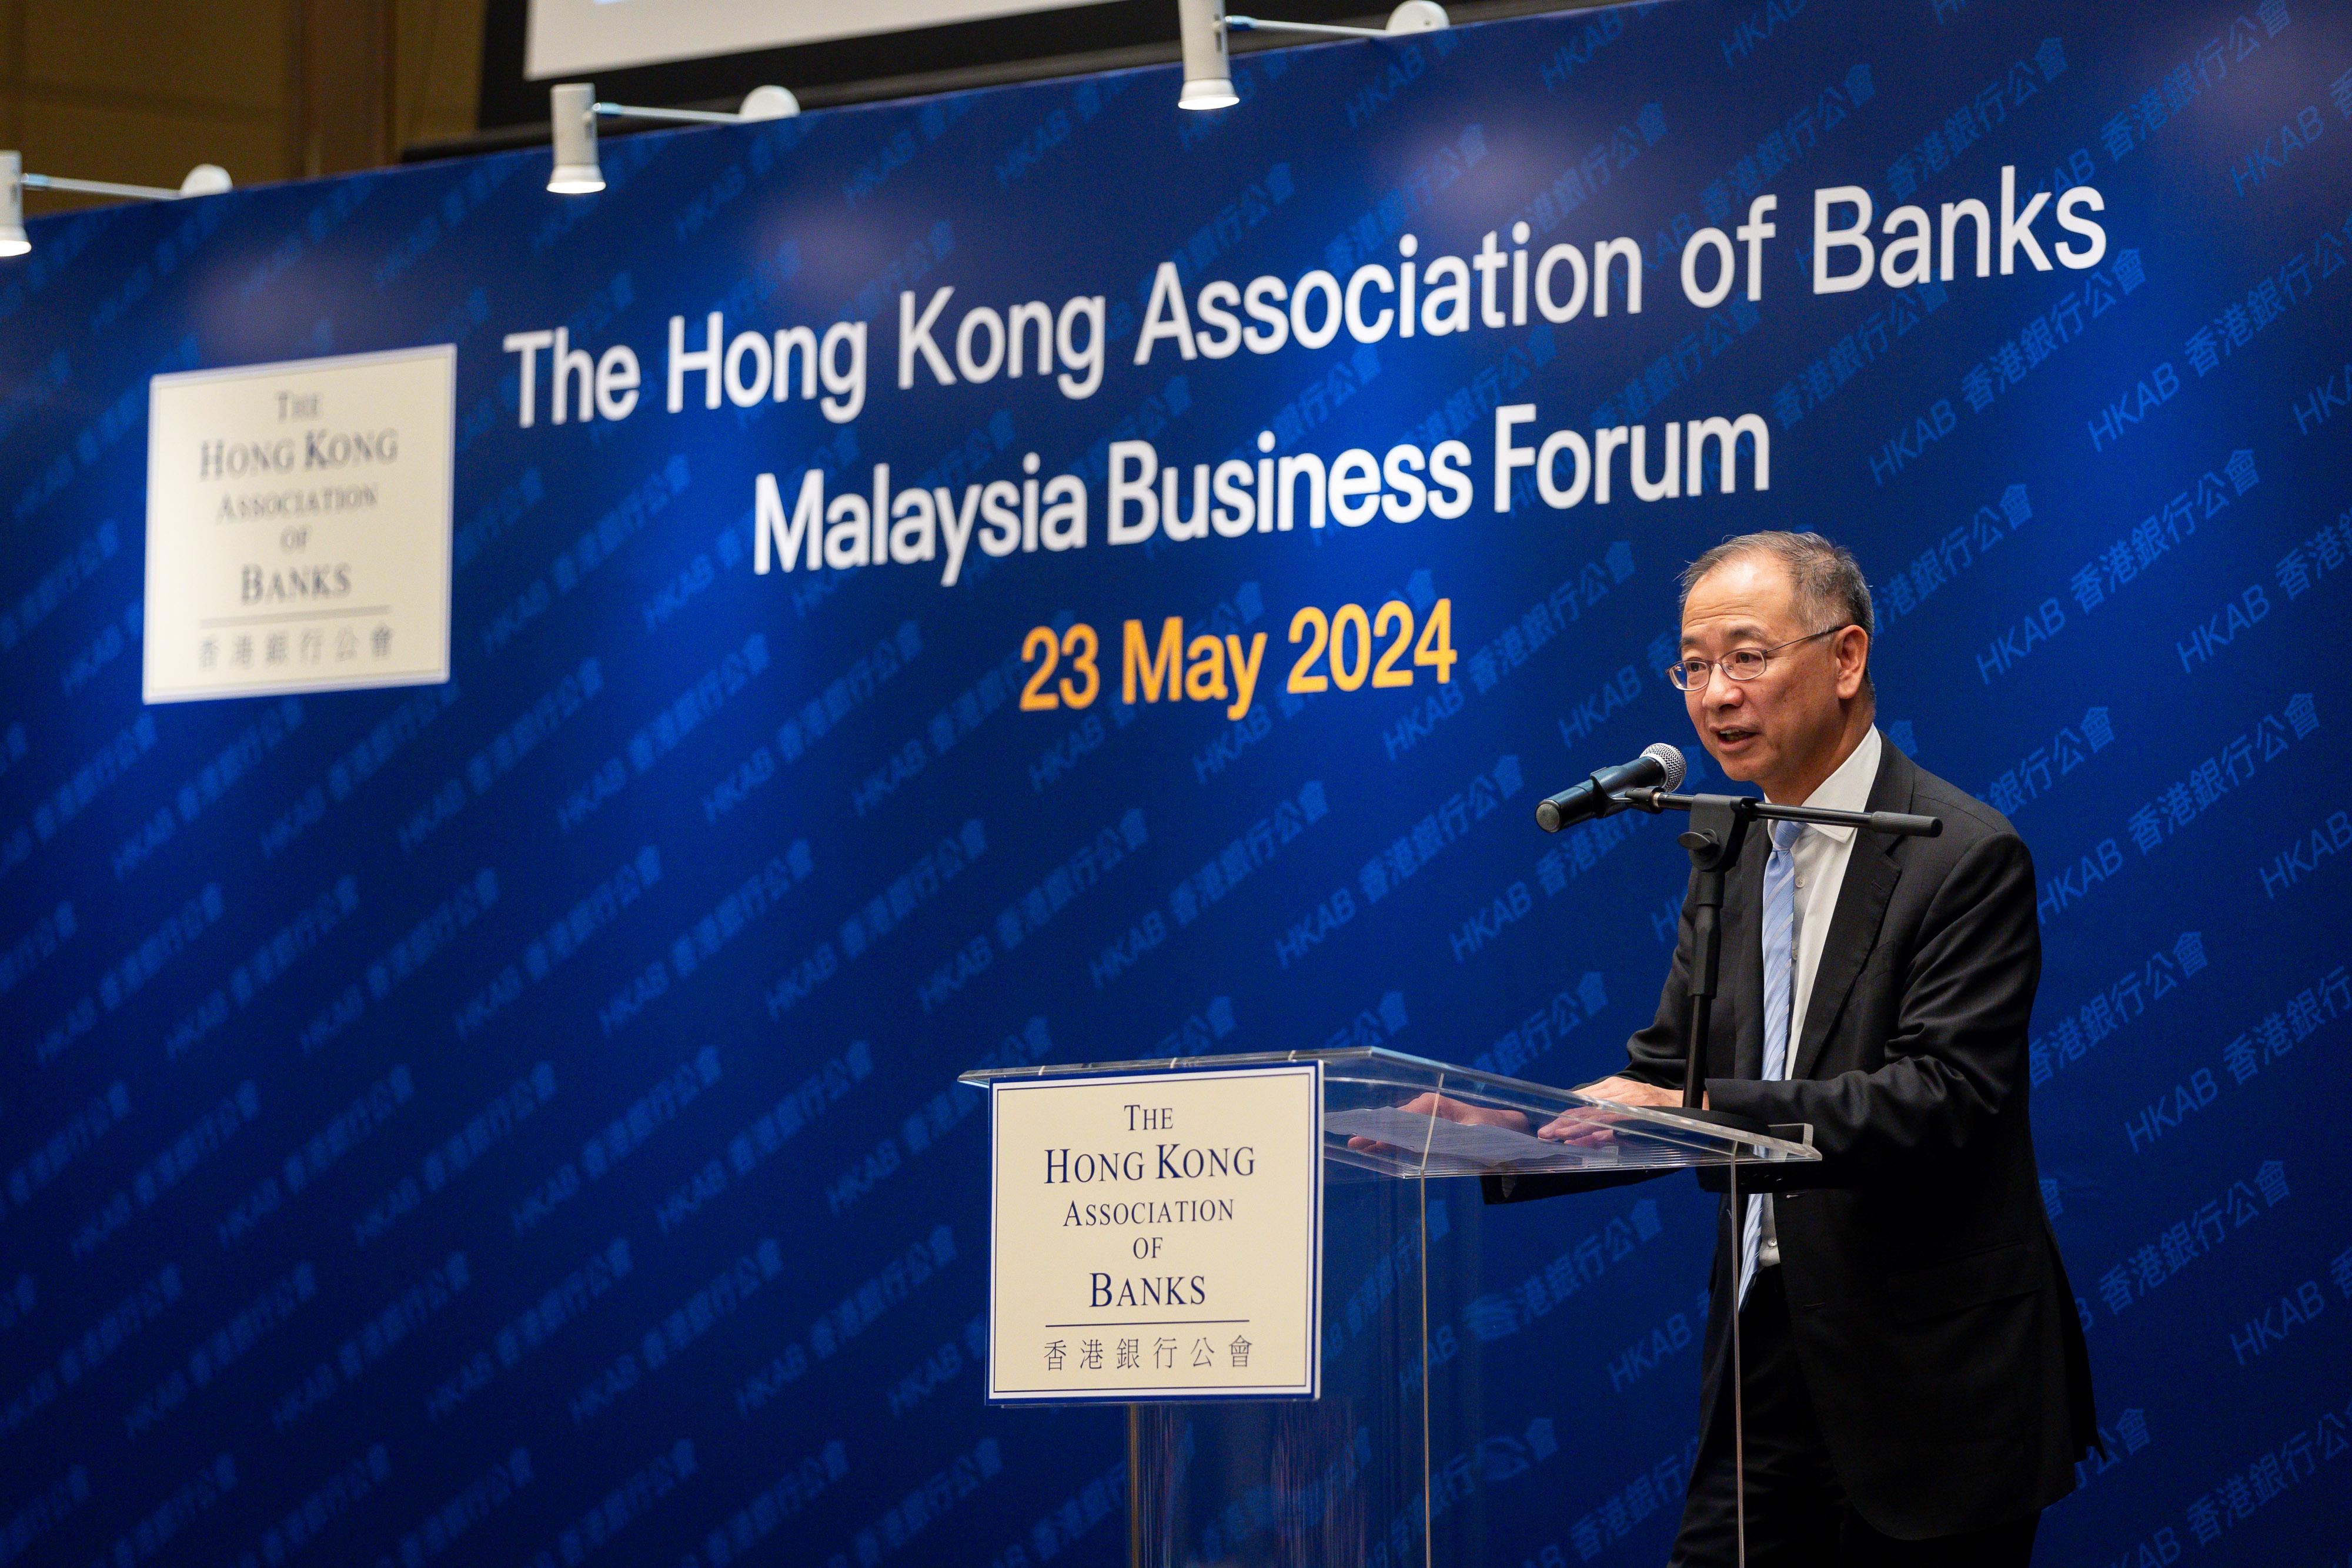 The Chief Executive of the Hong Kong Monetary Authority, Mr Eddie Yue, delivered a keynote speech at the Malaysia Business Forum in Kuala Lumpur on May 23.